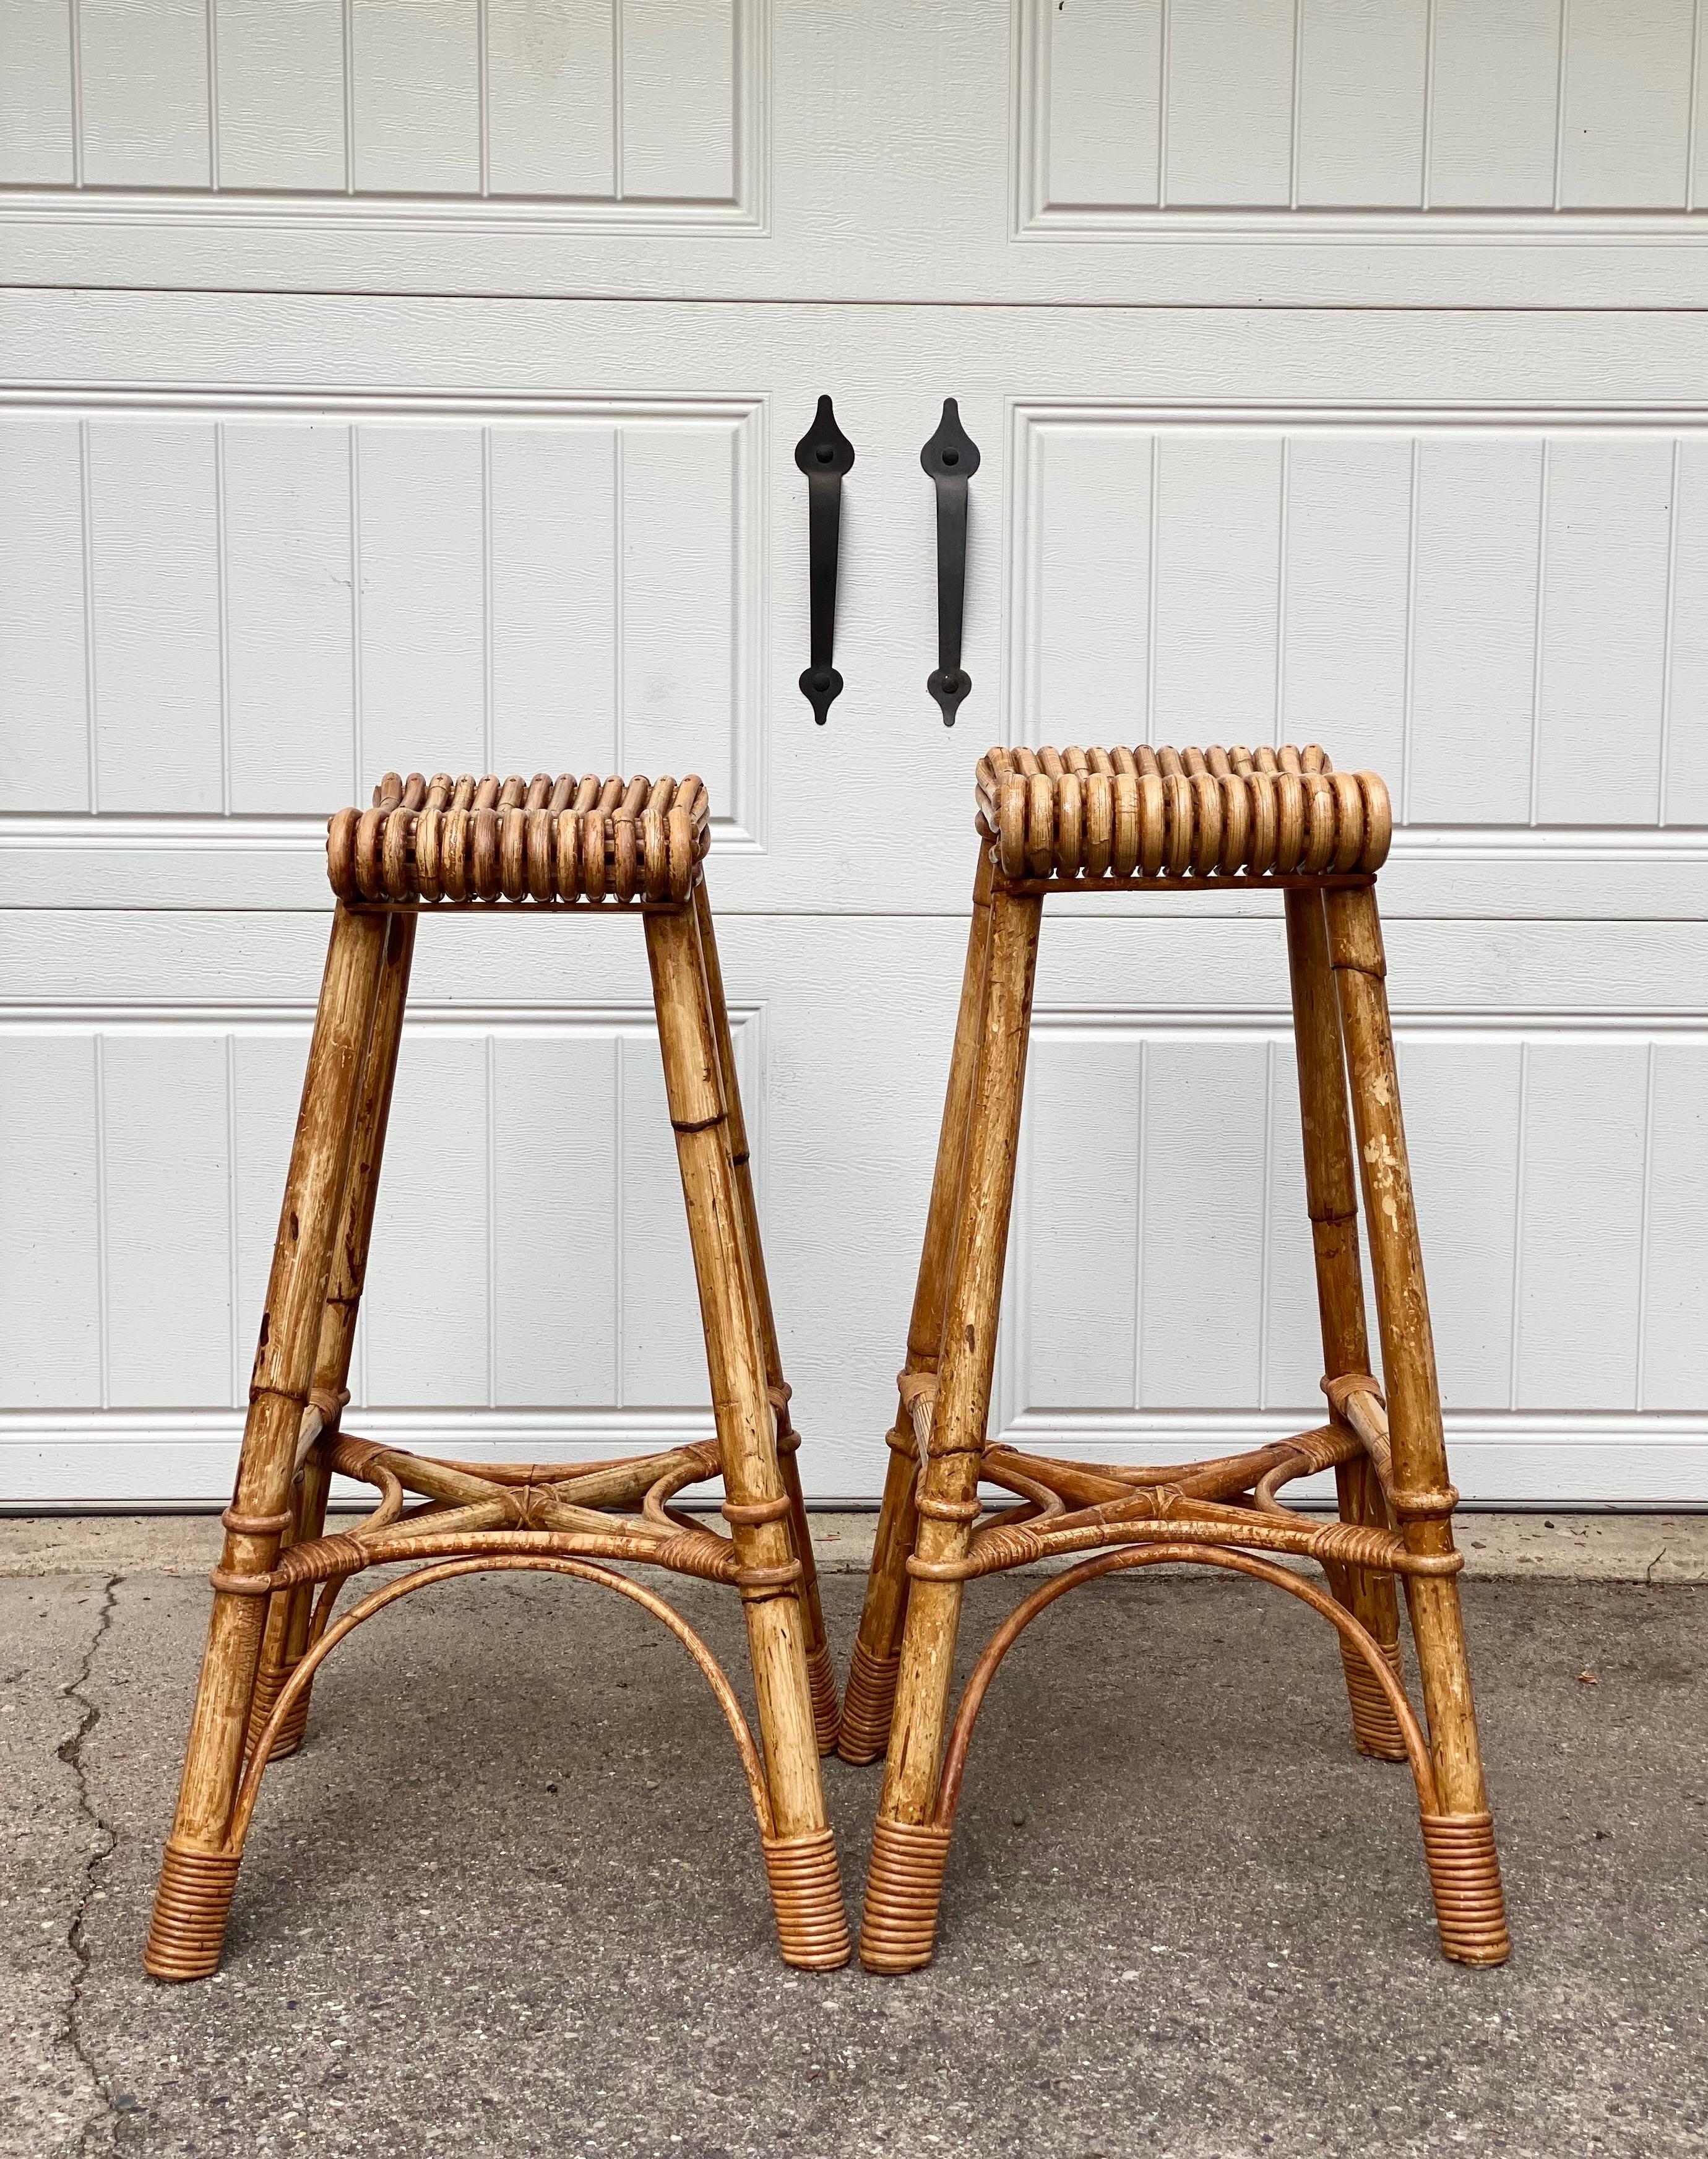 Mid-20th Century 1940s Vintage English Bamboo Bar Stools – a Pair For Sale